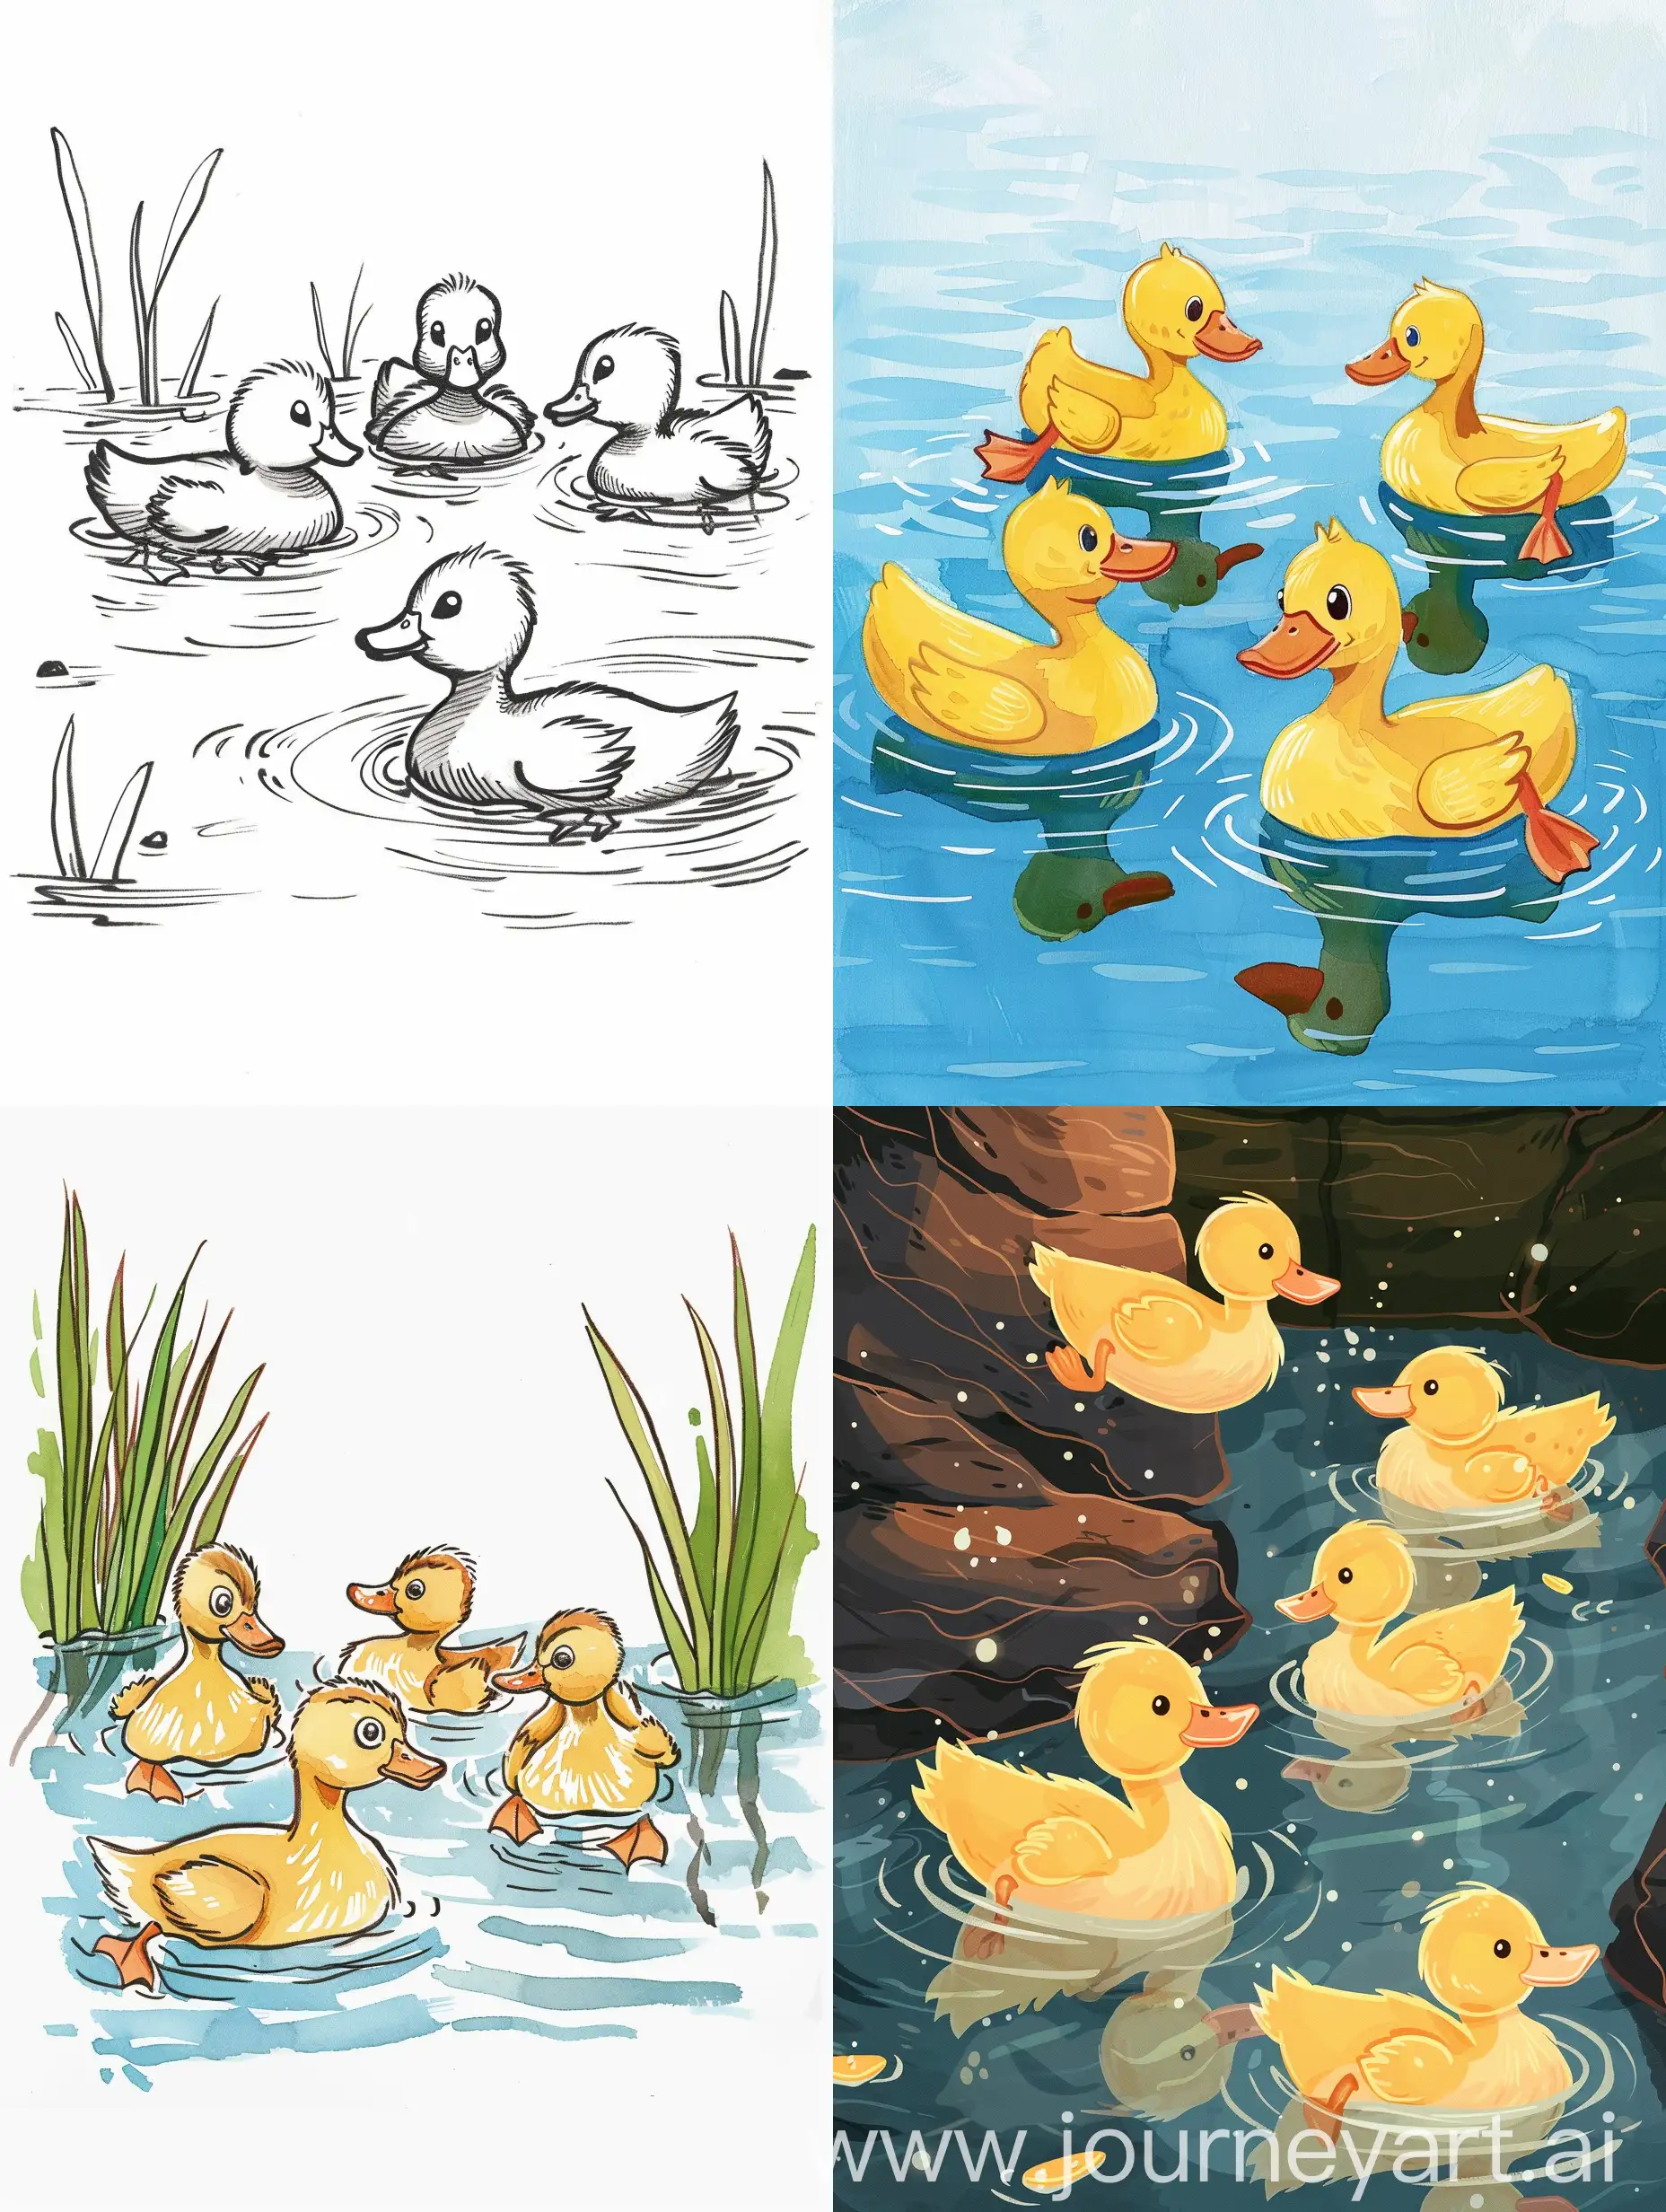 Playful-Five-Little-Duckies-Swimming-in-a-Tranquil-Pond